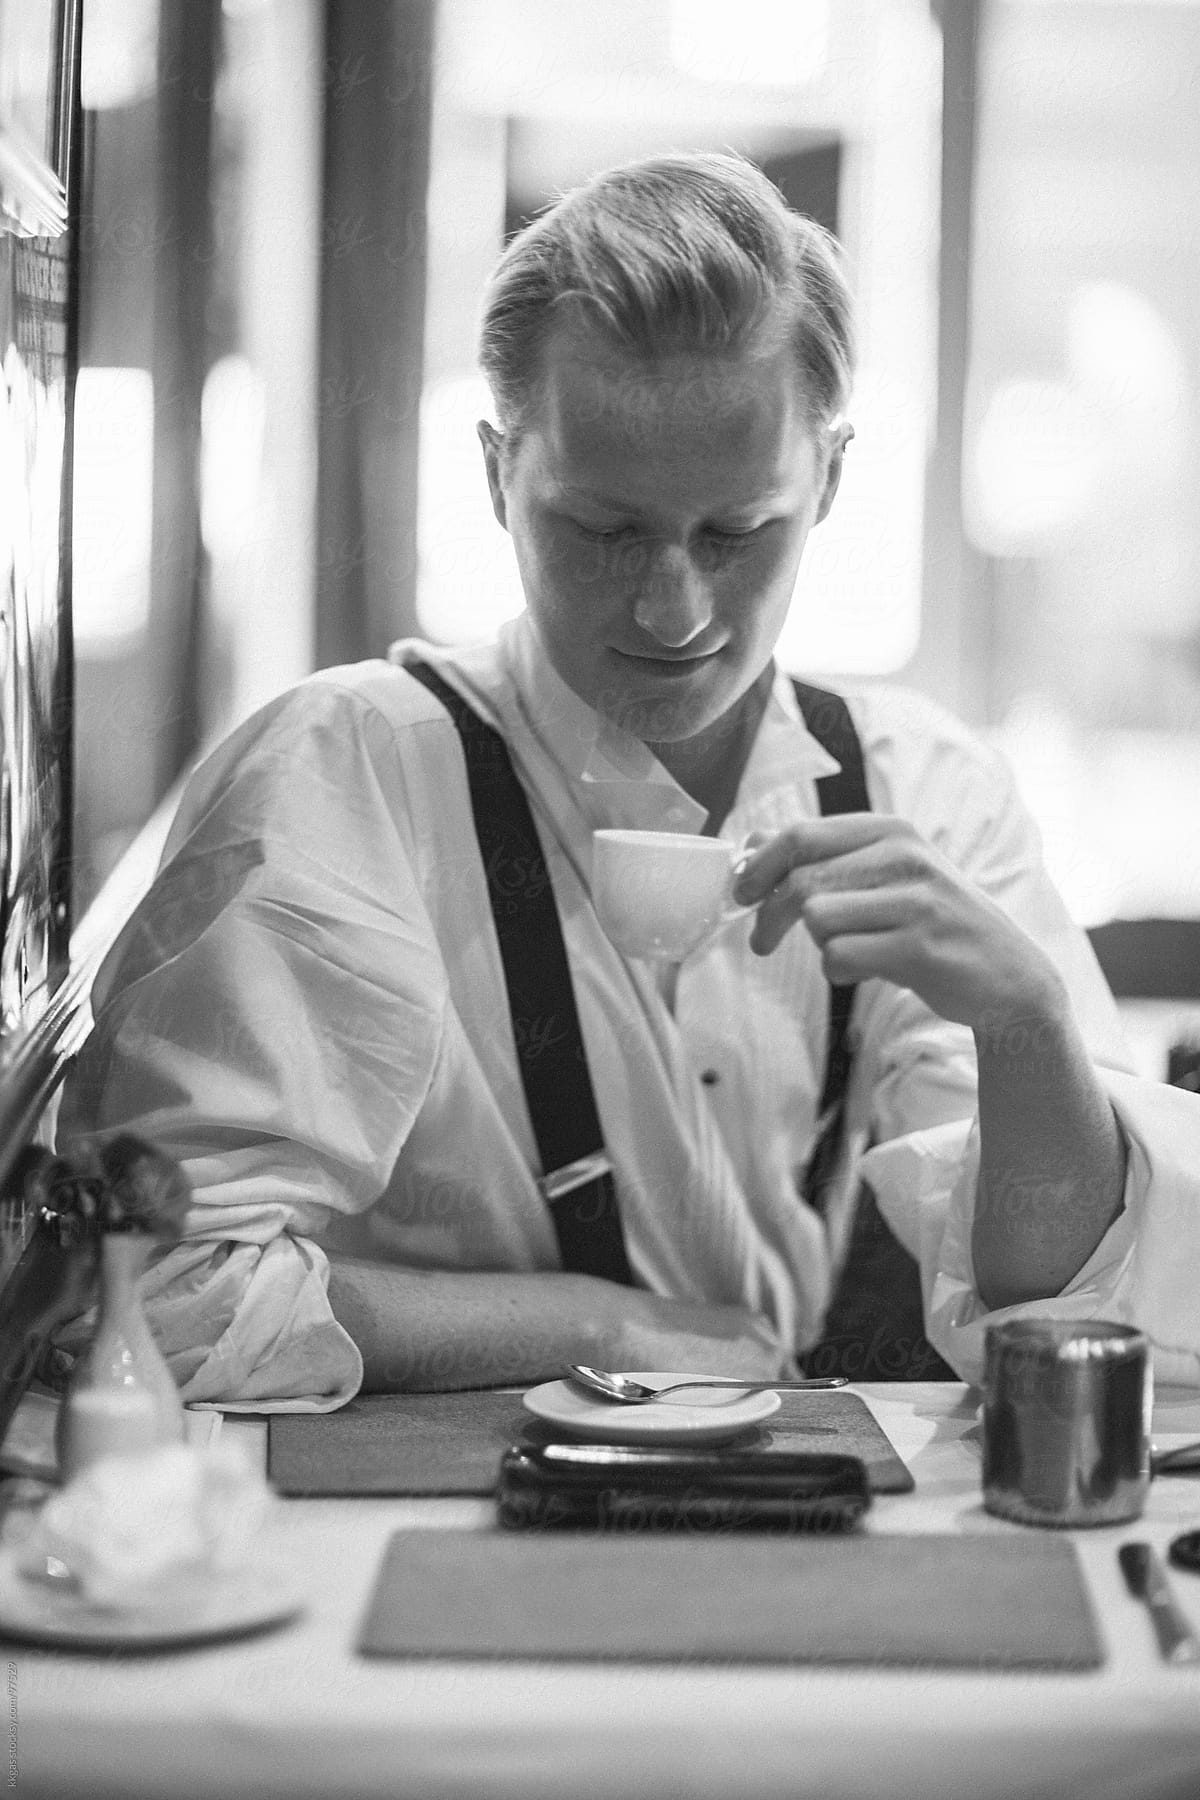 Young man drinking coffee in a restaurant